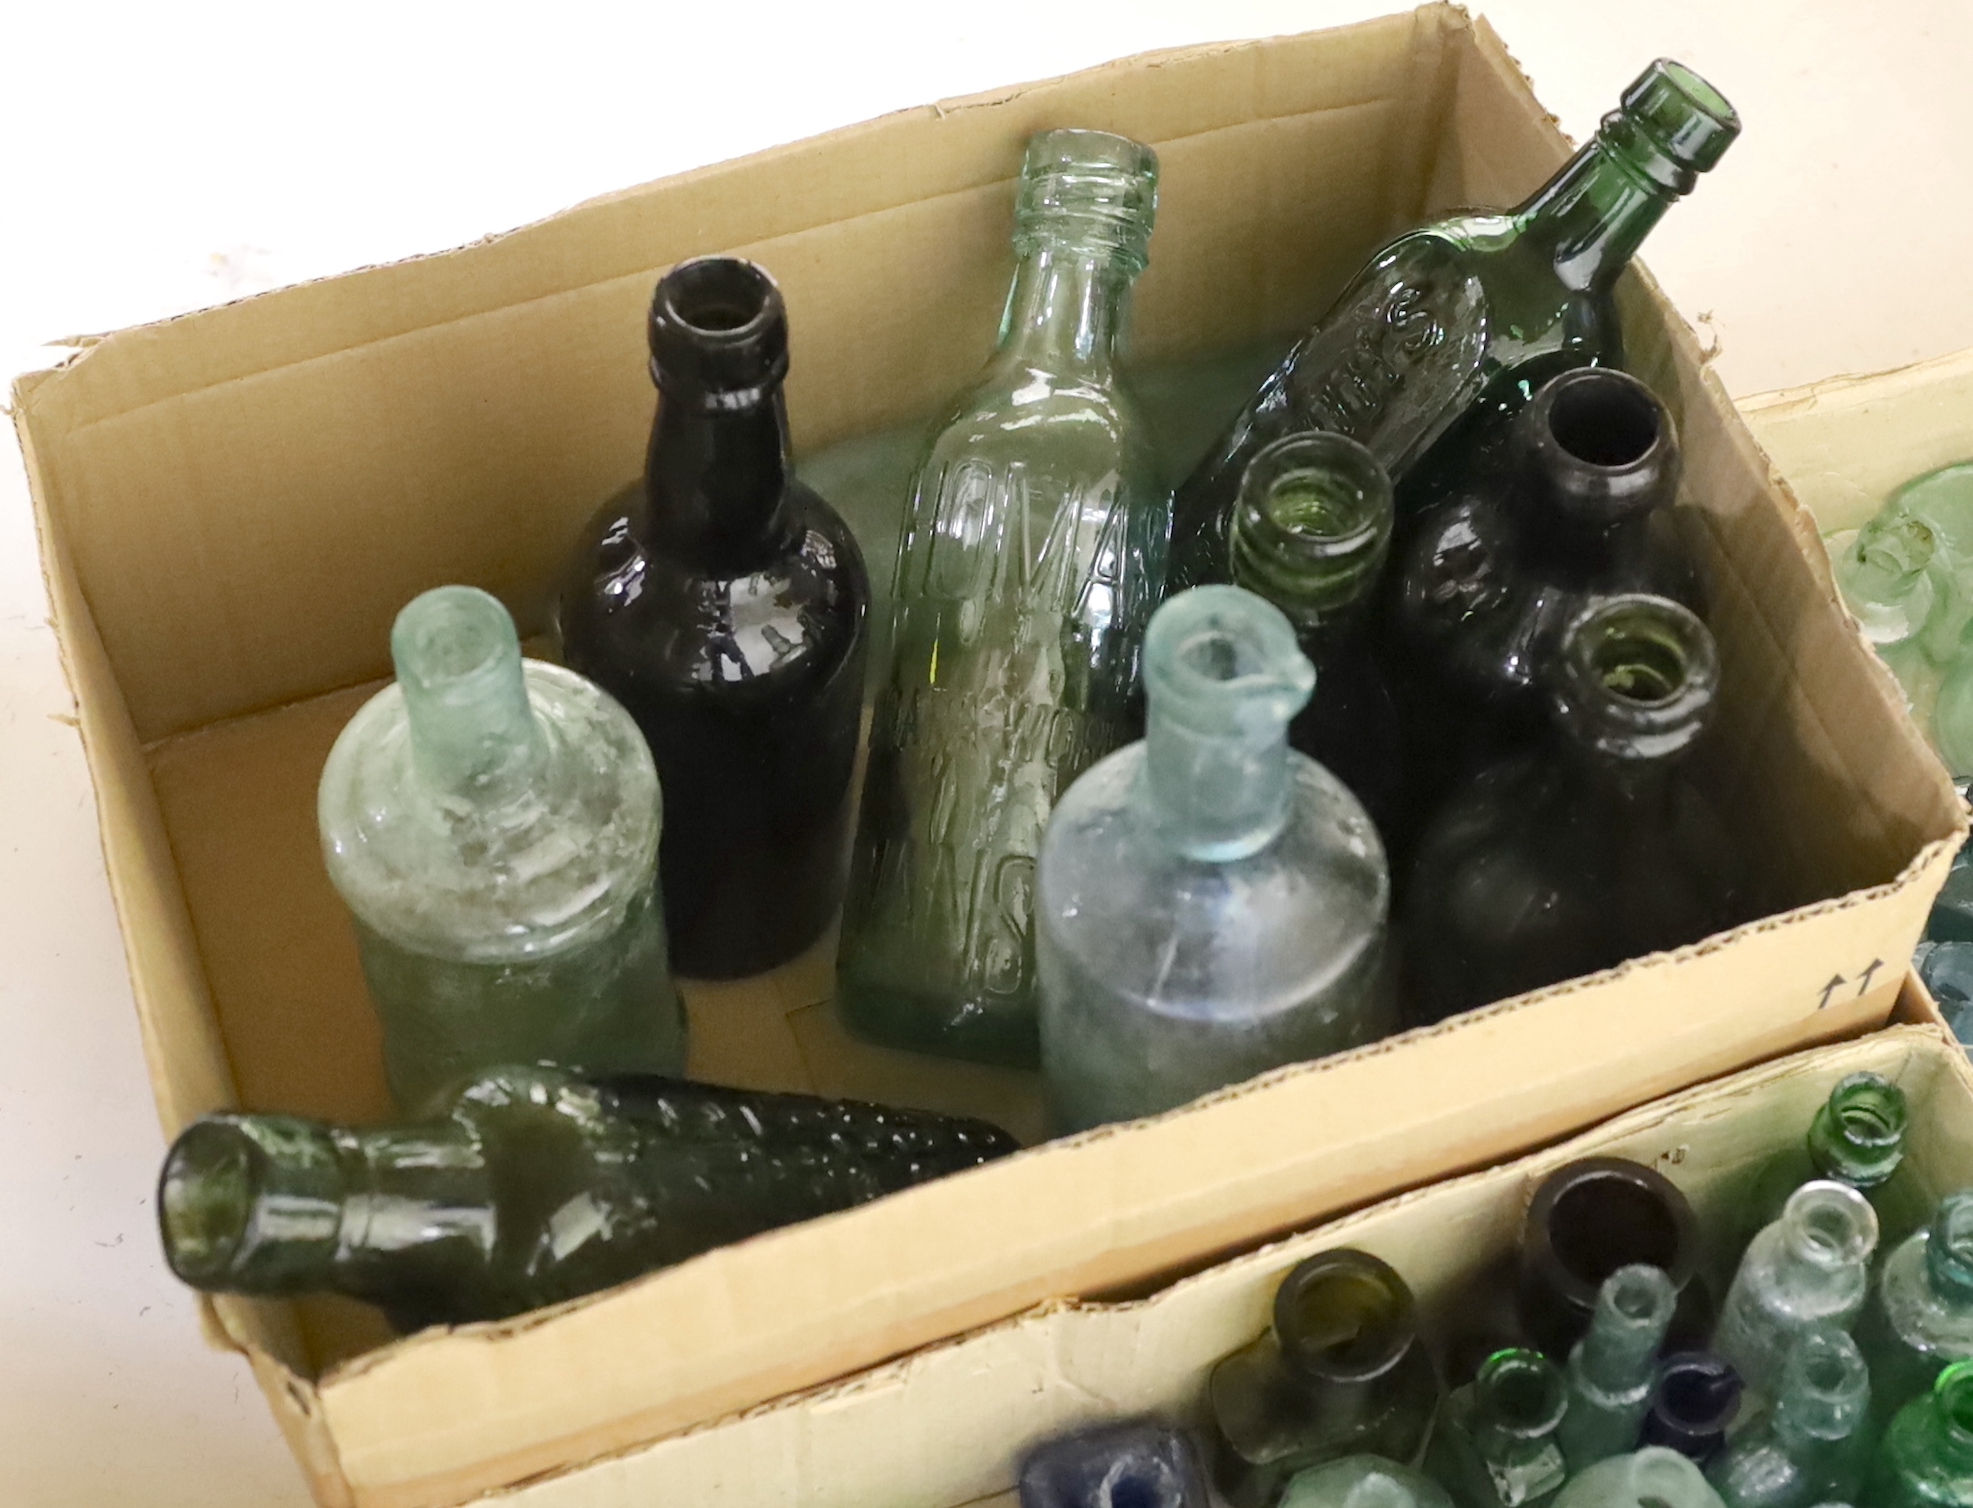 A collection of late 19th/early 20th century glass ink bottles, drink bottles and sauce bottles, brand names and advertising moulded into the glass on a number of examples, many ink bottles with pen rests moulded into th